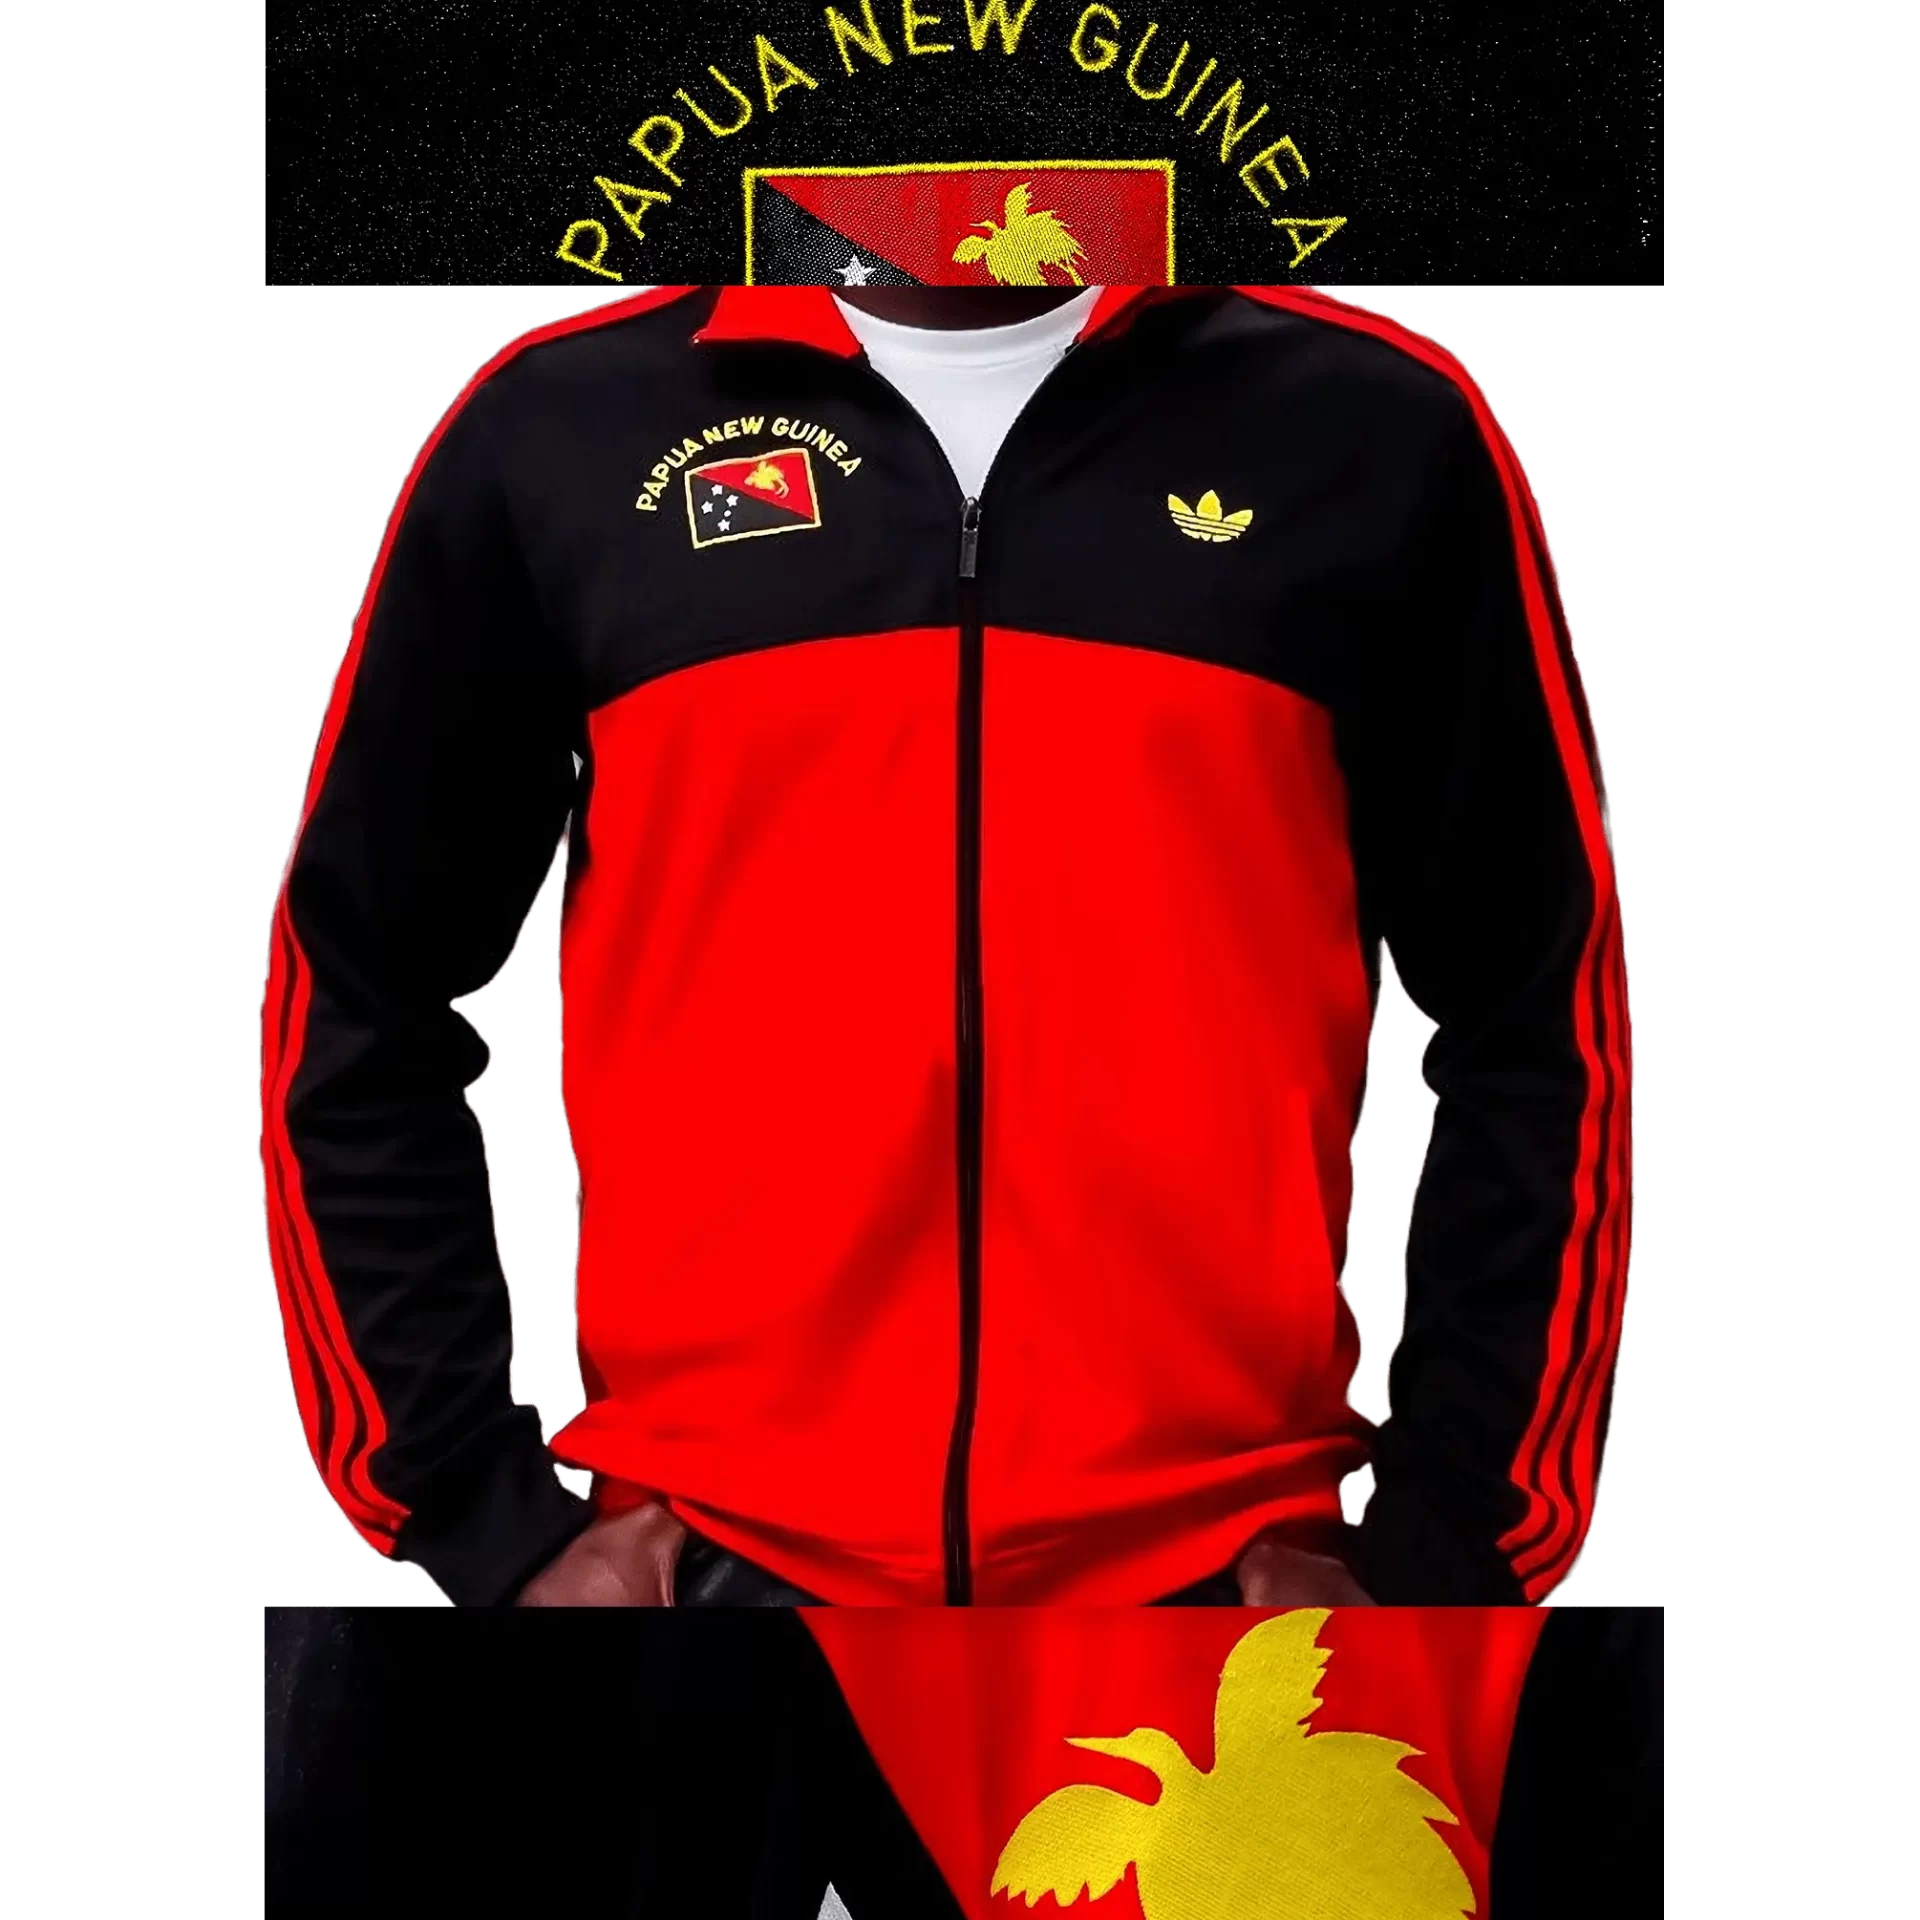 Men's 2008 Papua New Guinea Track Top by Adidas Originals: Intriguing (EnLawded.com file #lmchk61272ip2y123339kg9st)